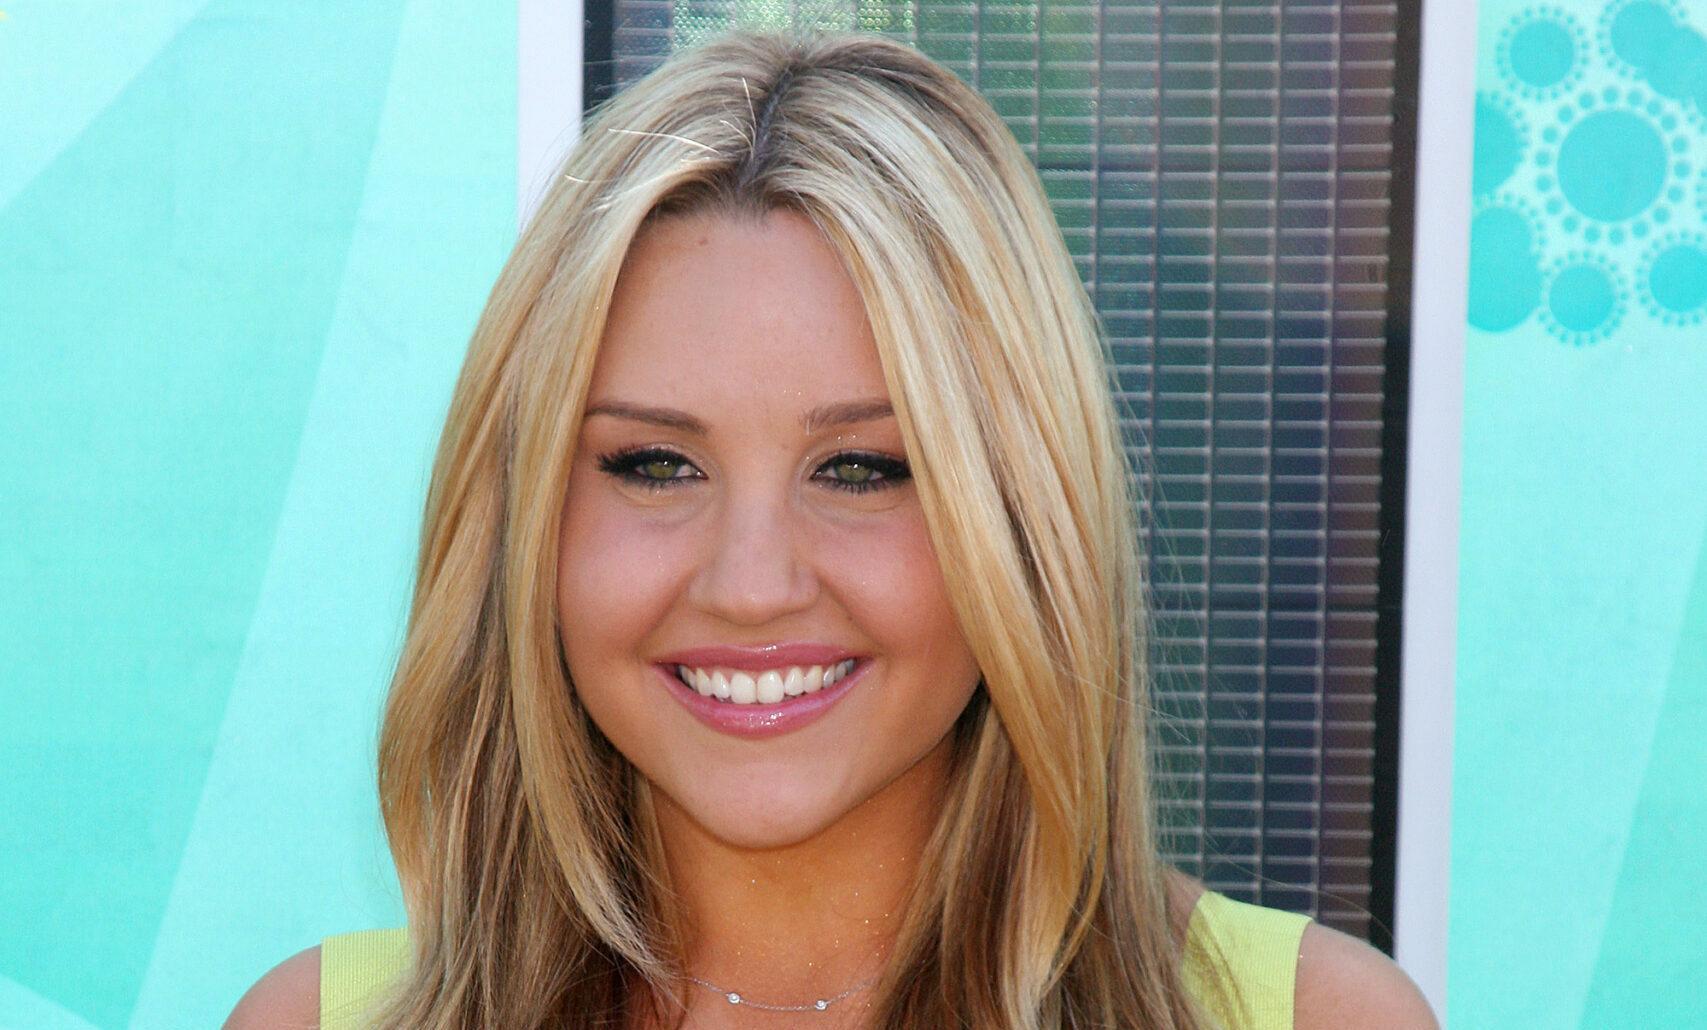 A photo showing Amanda Bynes in a yellow dress